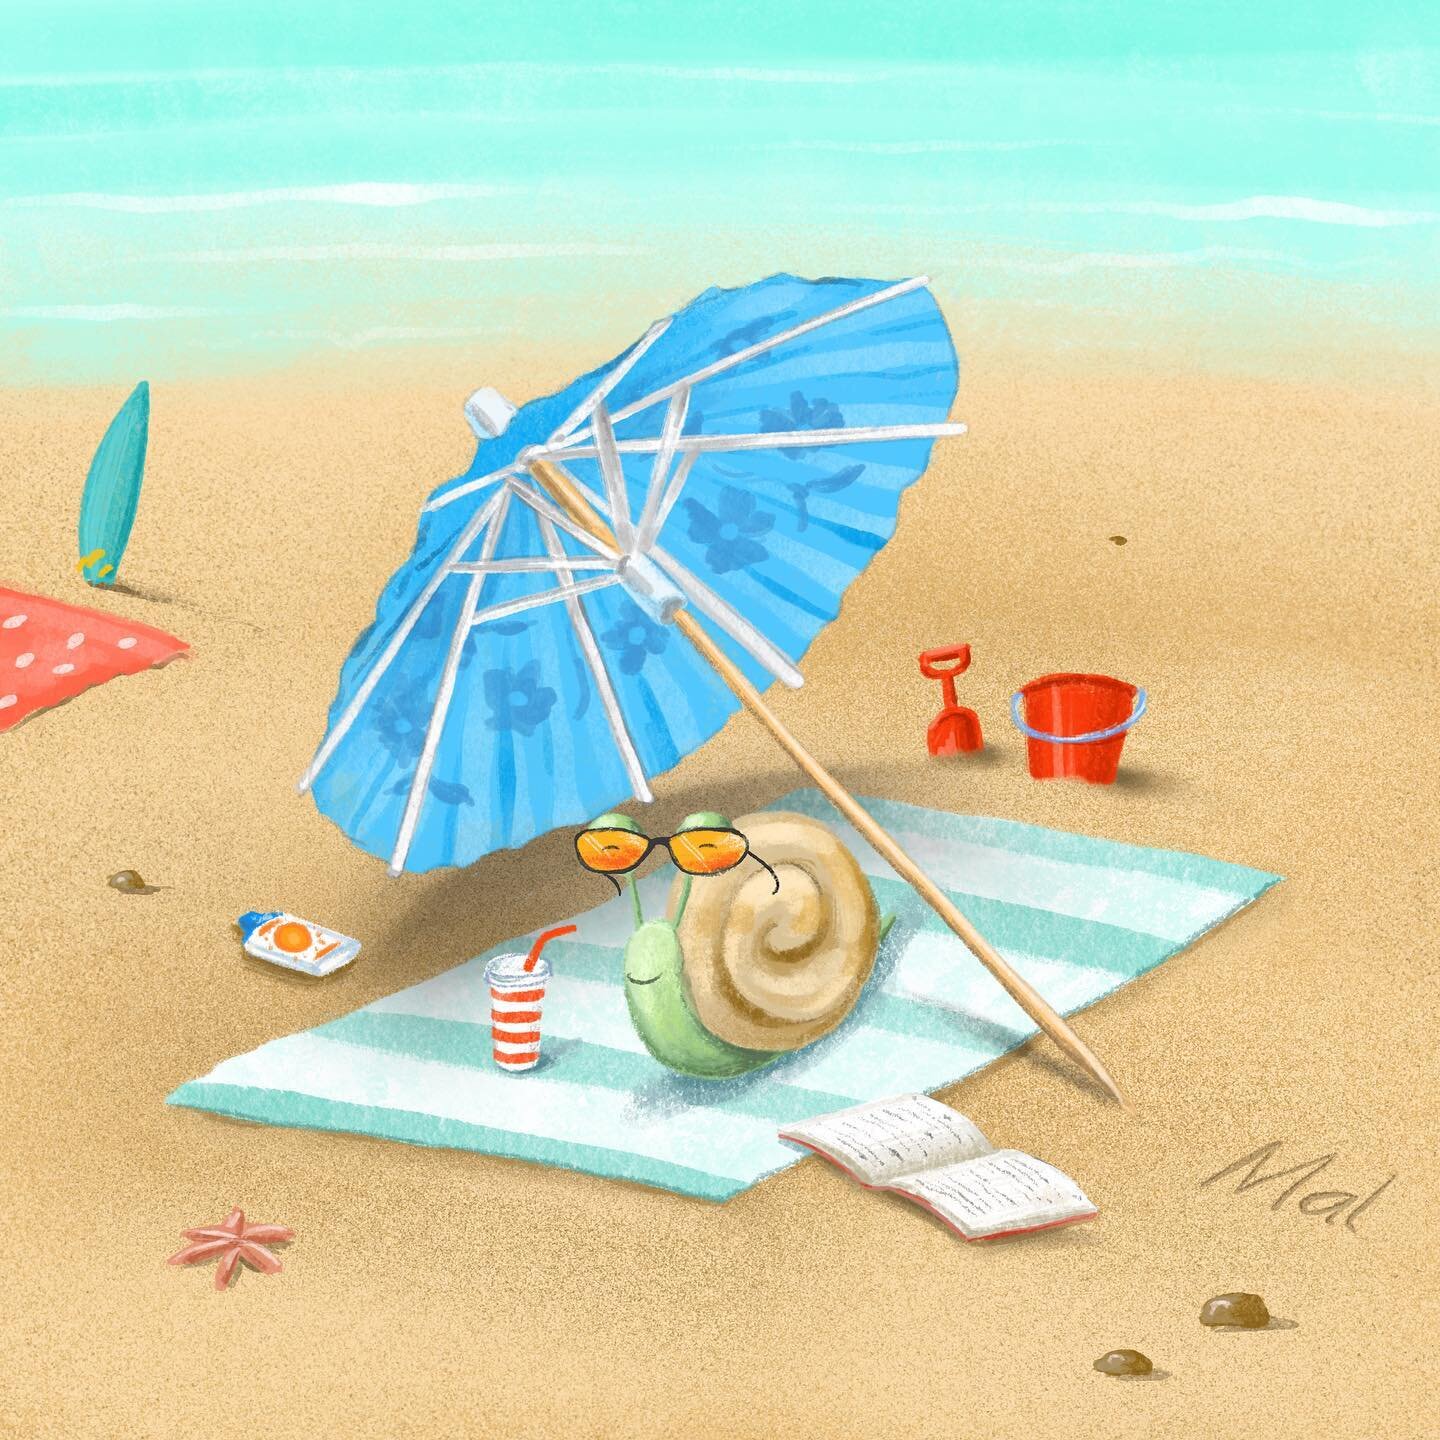 If you were wondering where Mr Snail has been, he&rsquo;s just been away on holidays for a bit, and apparently had a relaxing time. But has his creator had a lovely beach break? Absolutely not! Sometimes life throws multiple curveballs and setbacks. 